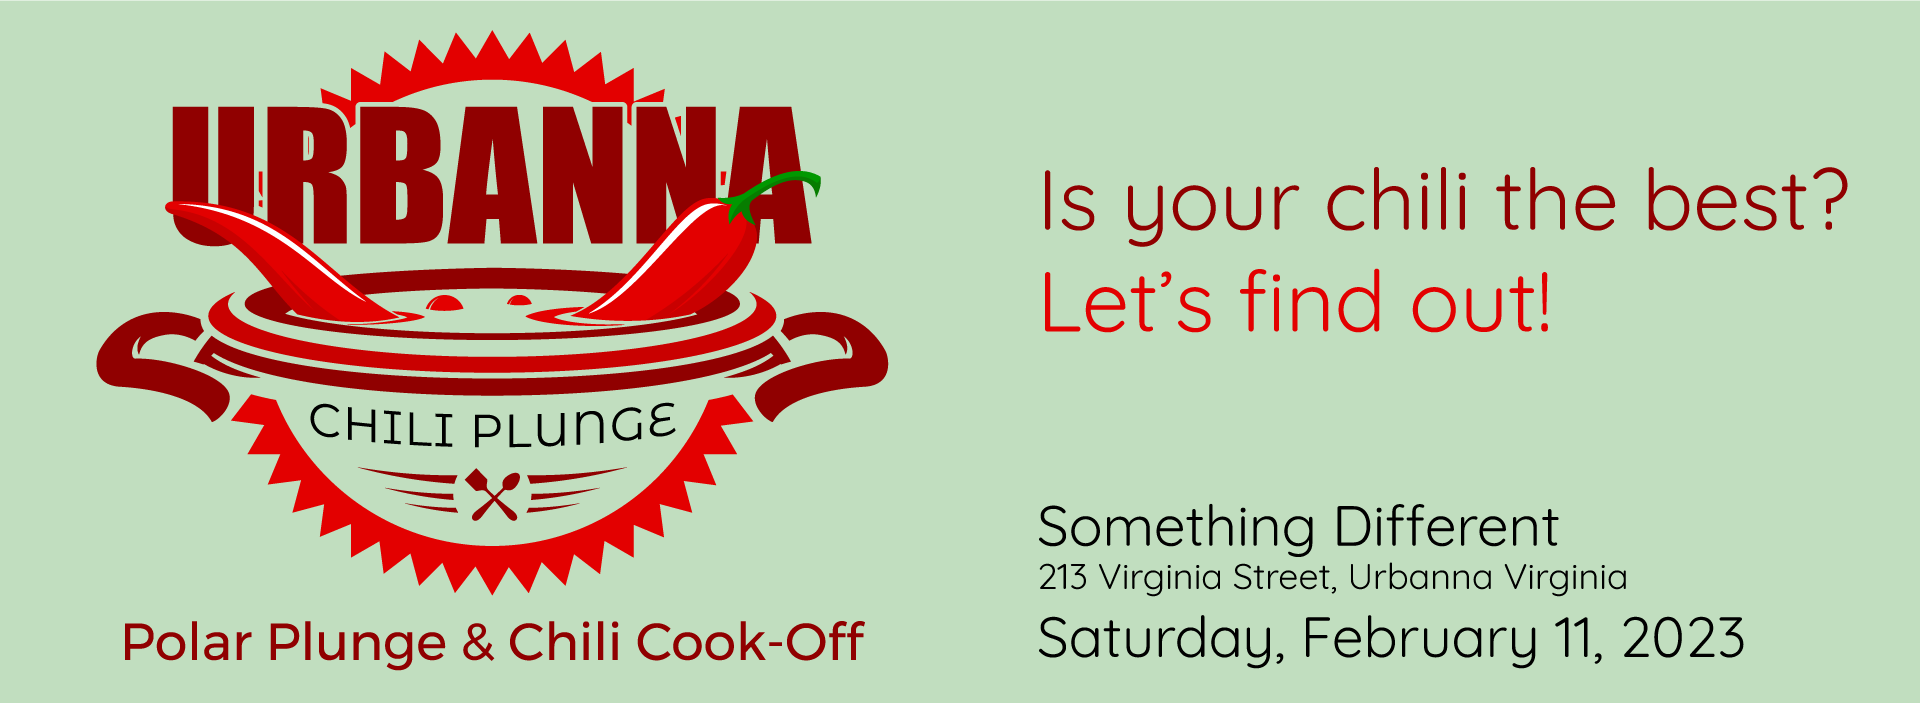 8739-chili-plunge-banner-2.png